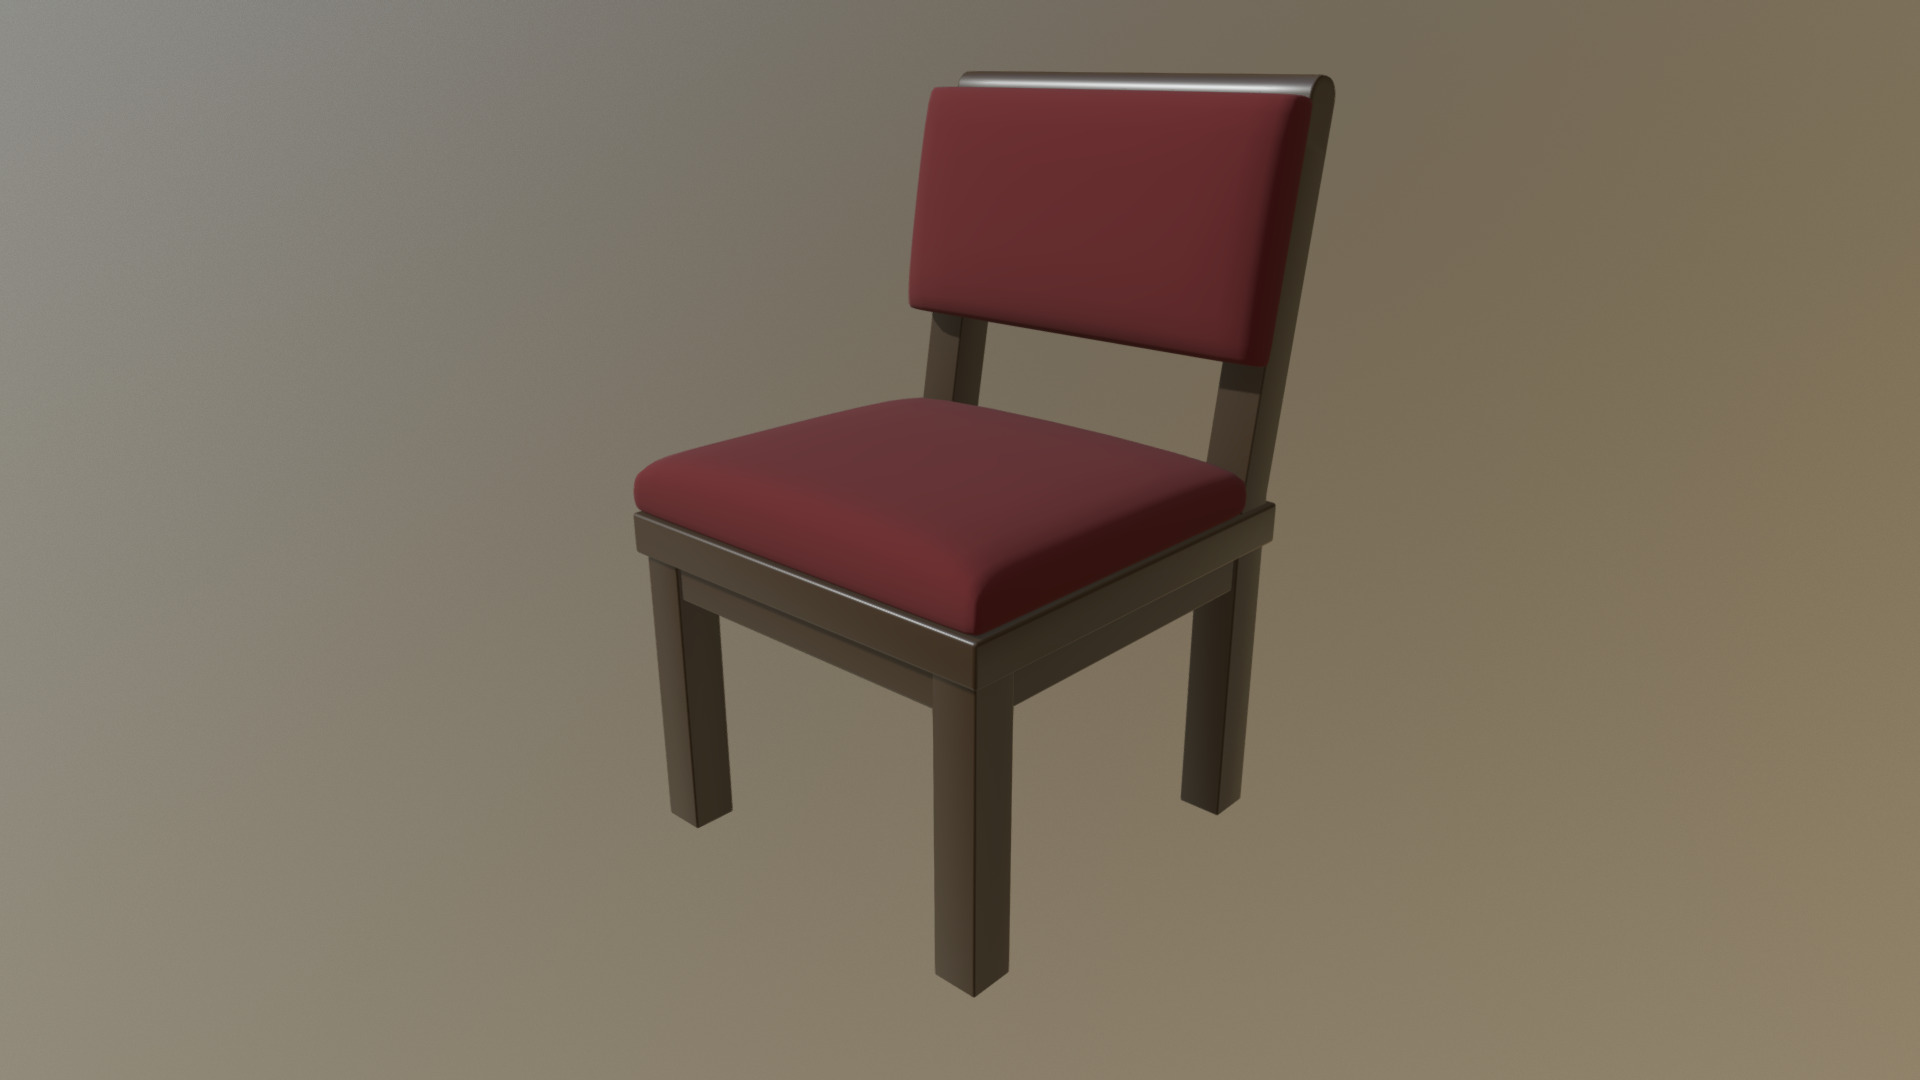 3D model Church Chair #1 V2 - This is a 3D model of the Church Chair #1 V2. The 3D model is about a red chair with a white background.